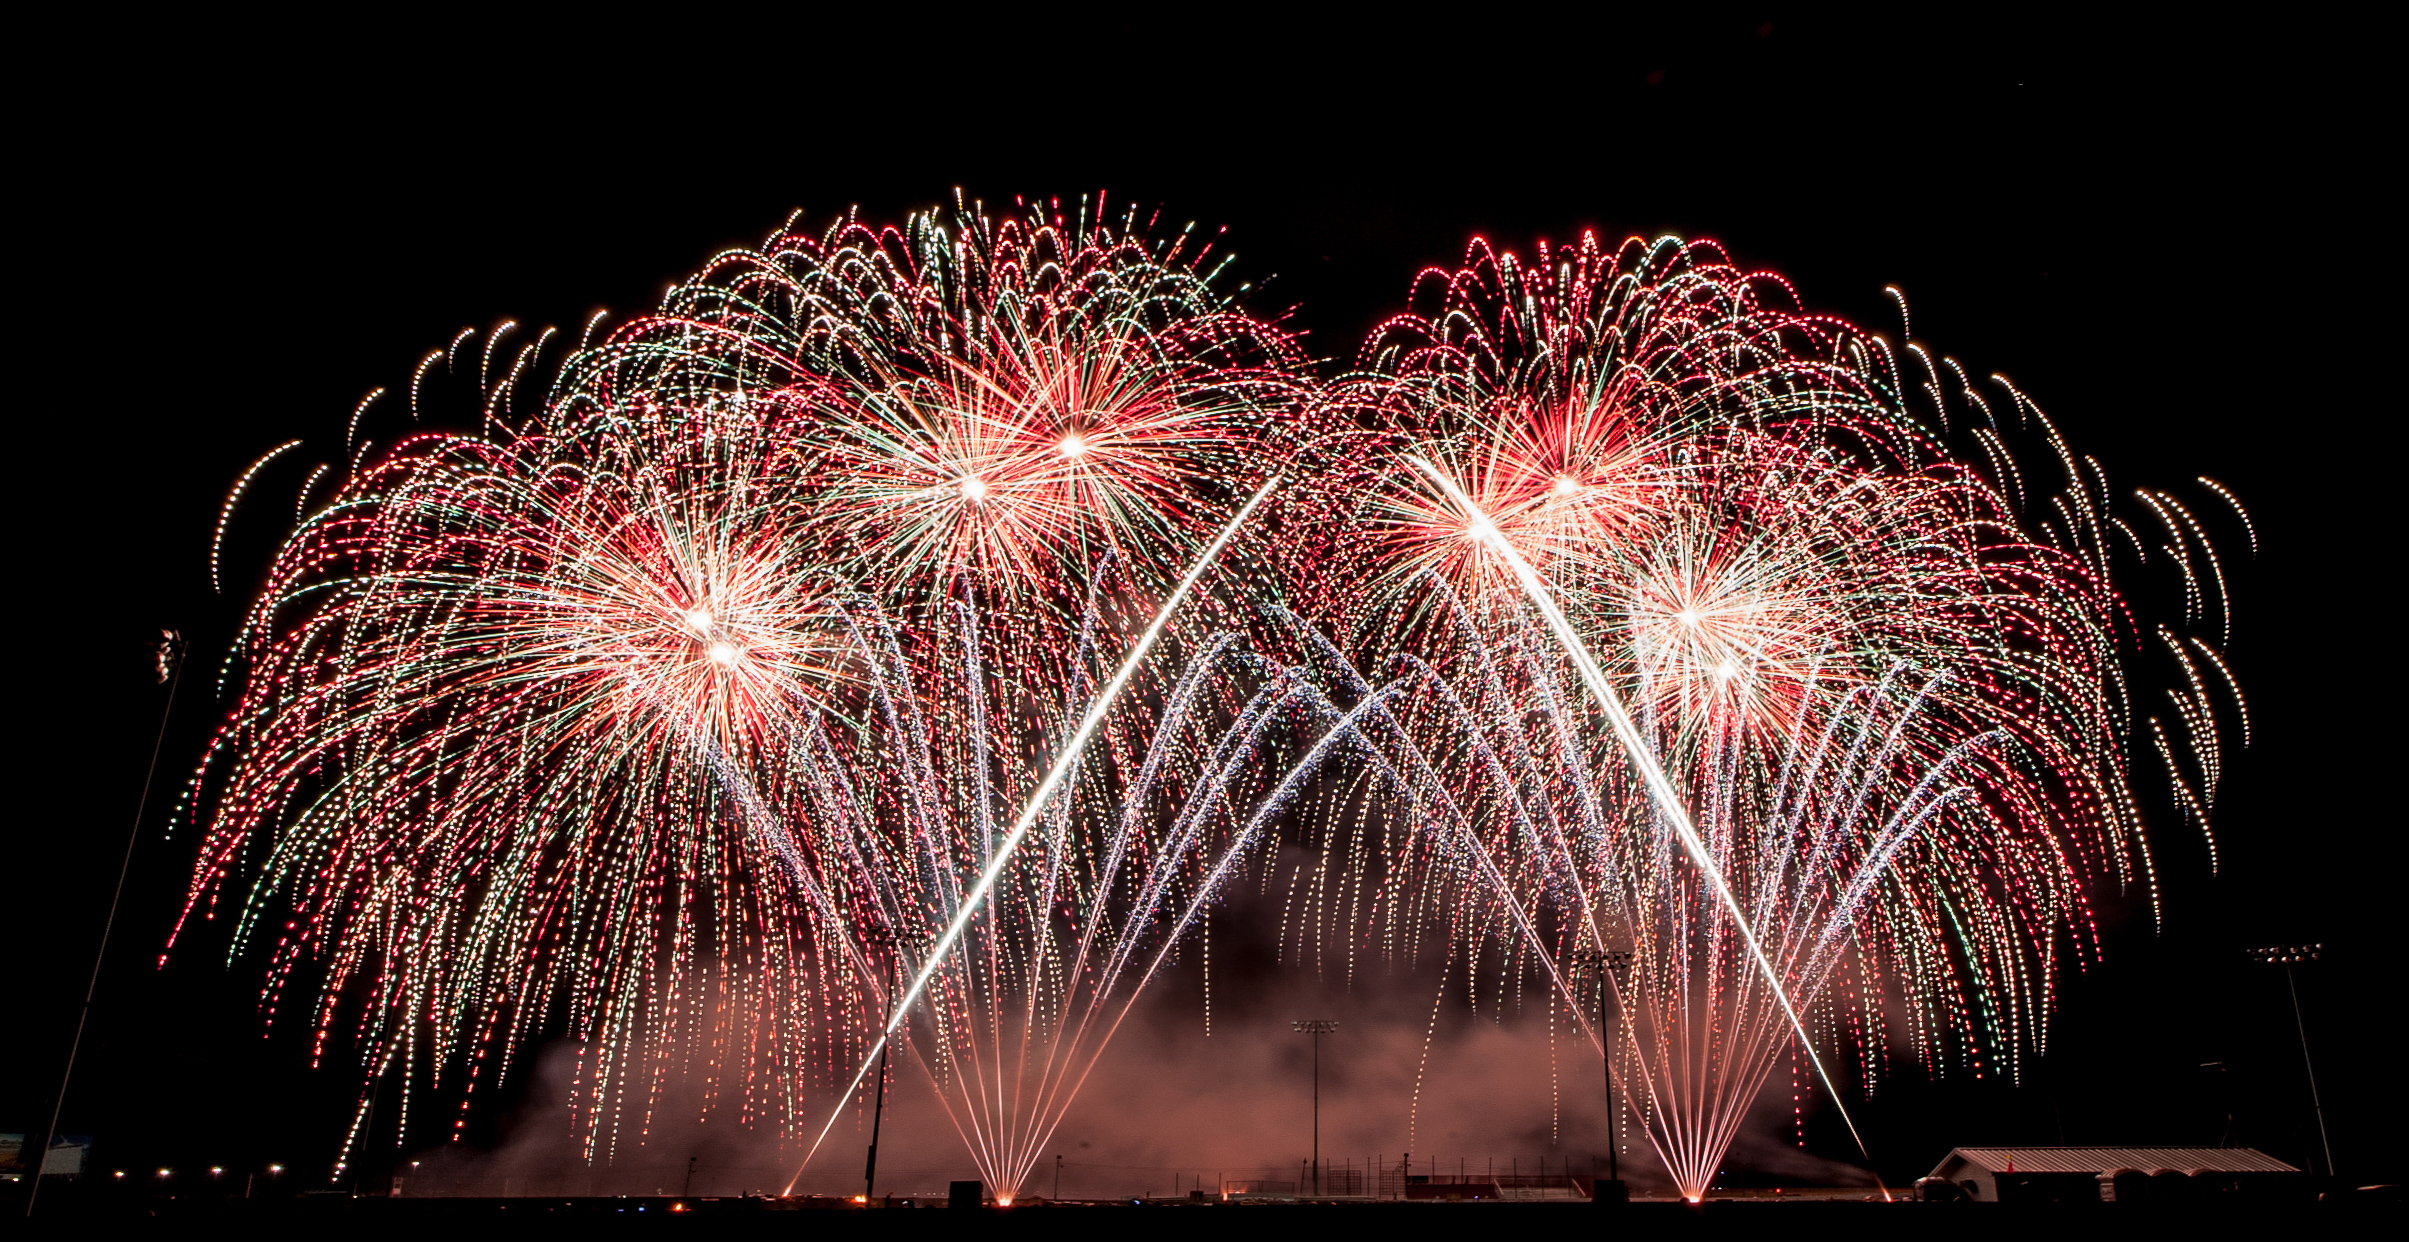 Fireworks Photography Resources